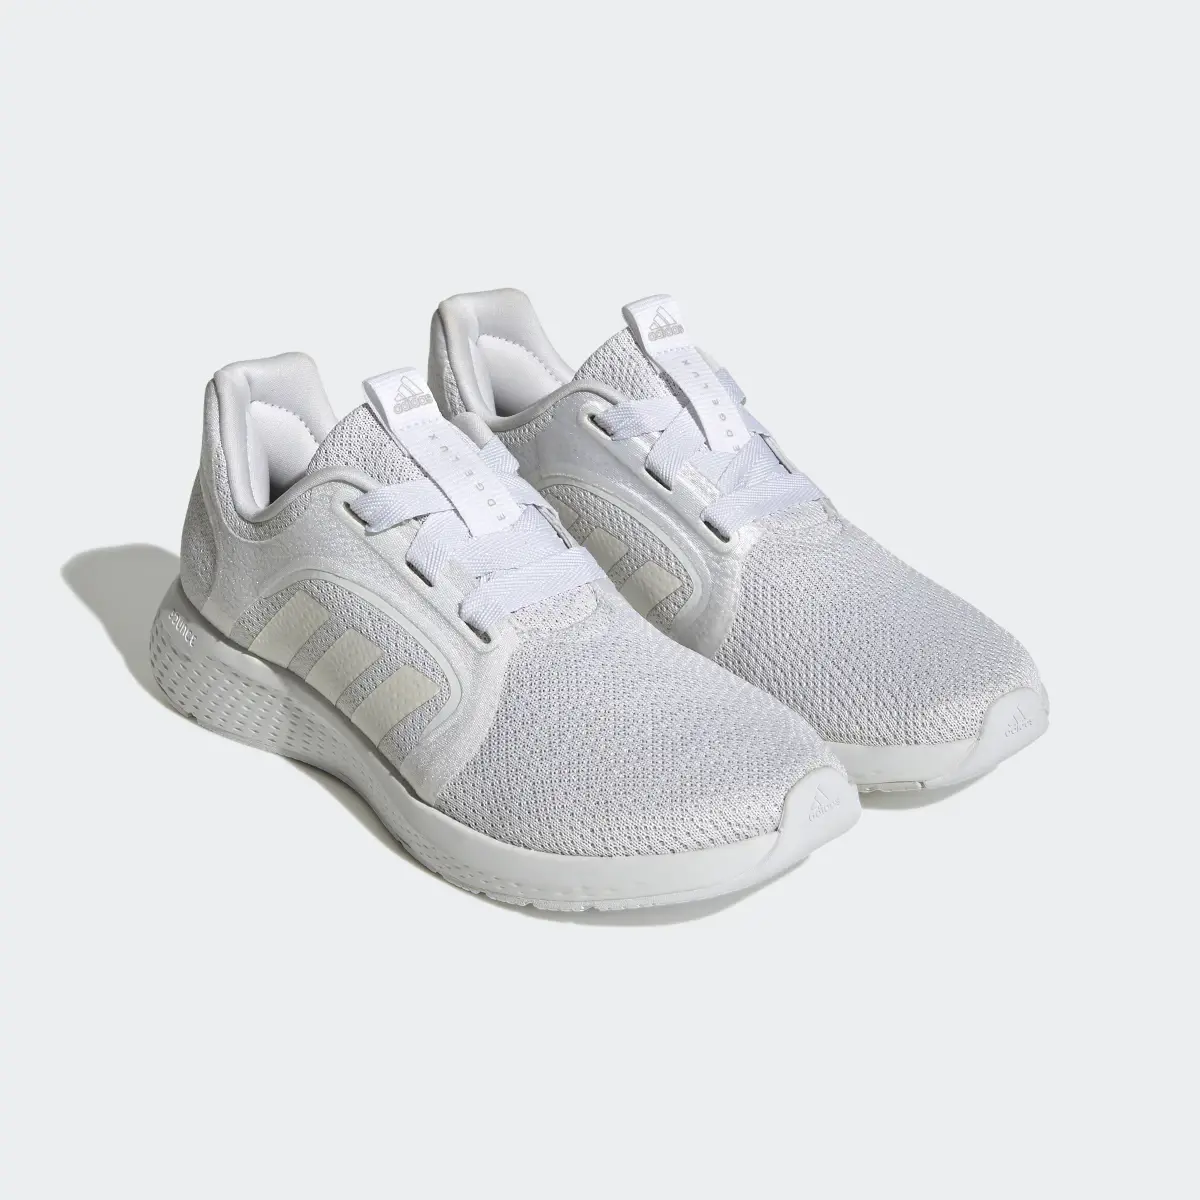 Adidas Edge Lux Shoes. 3